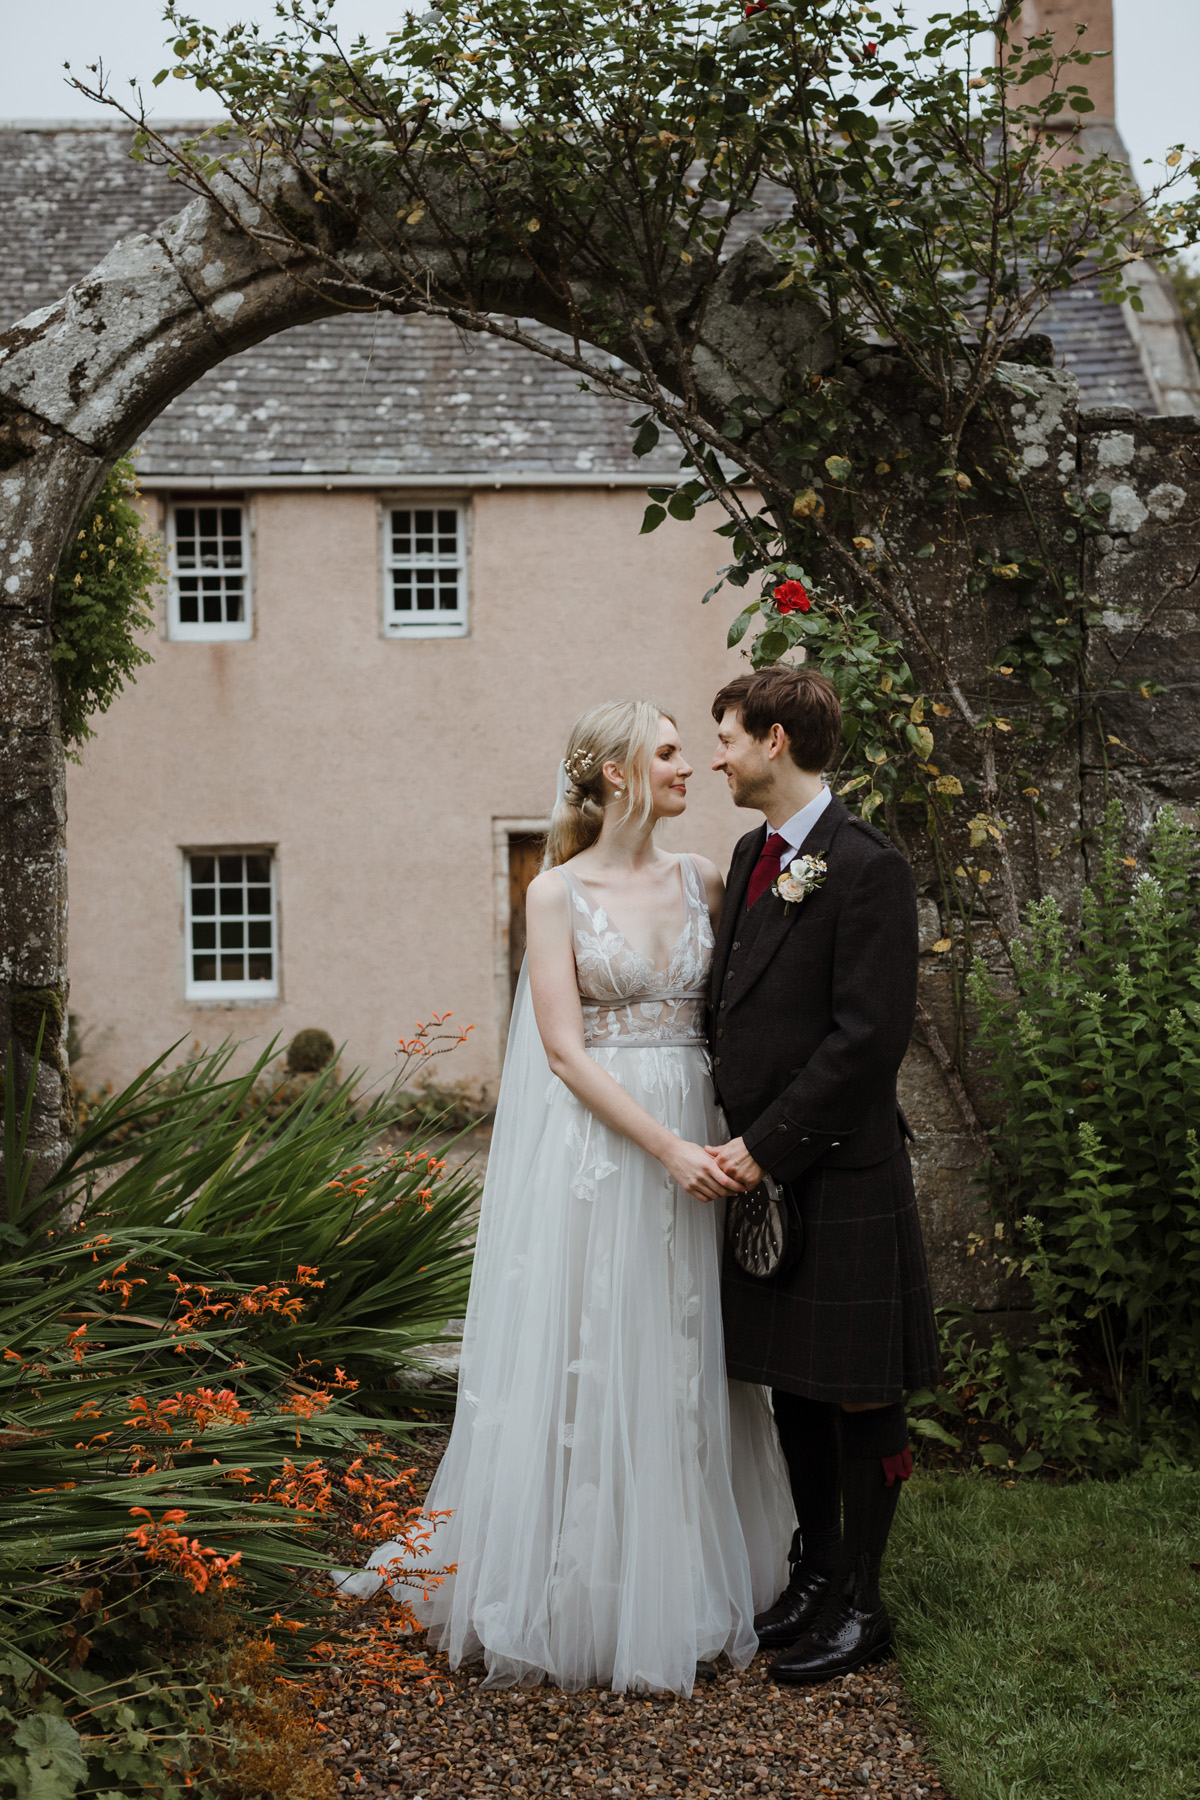 A Peach Pretty Wedding at Aswanley in Aberdeenshire for Emily, in Willowby by Wattersgant Outdoor Wedding at Aswanley | Love My Dress®